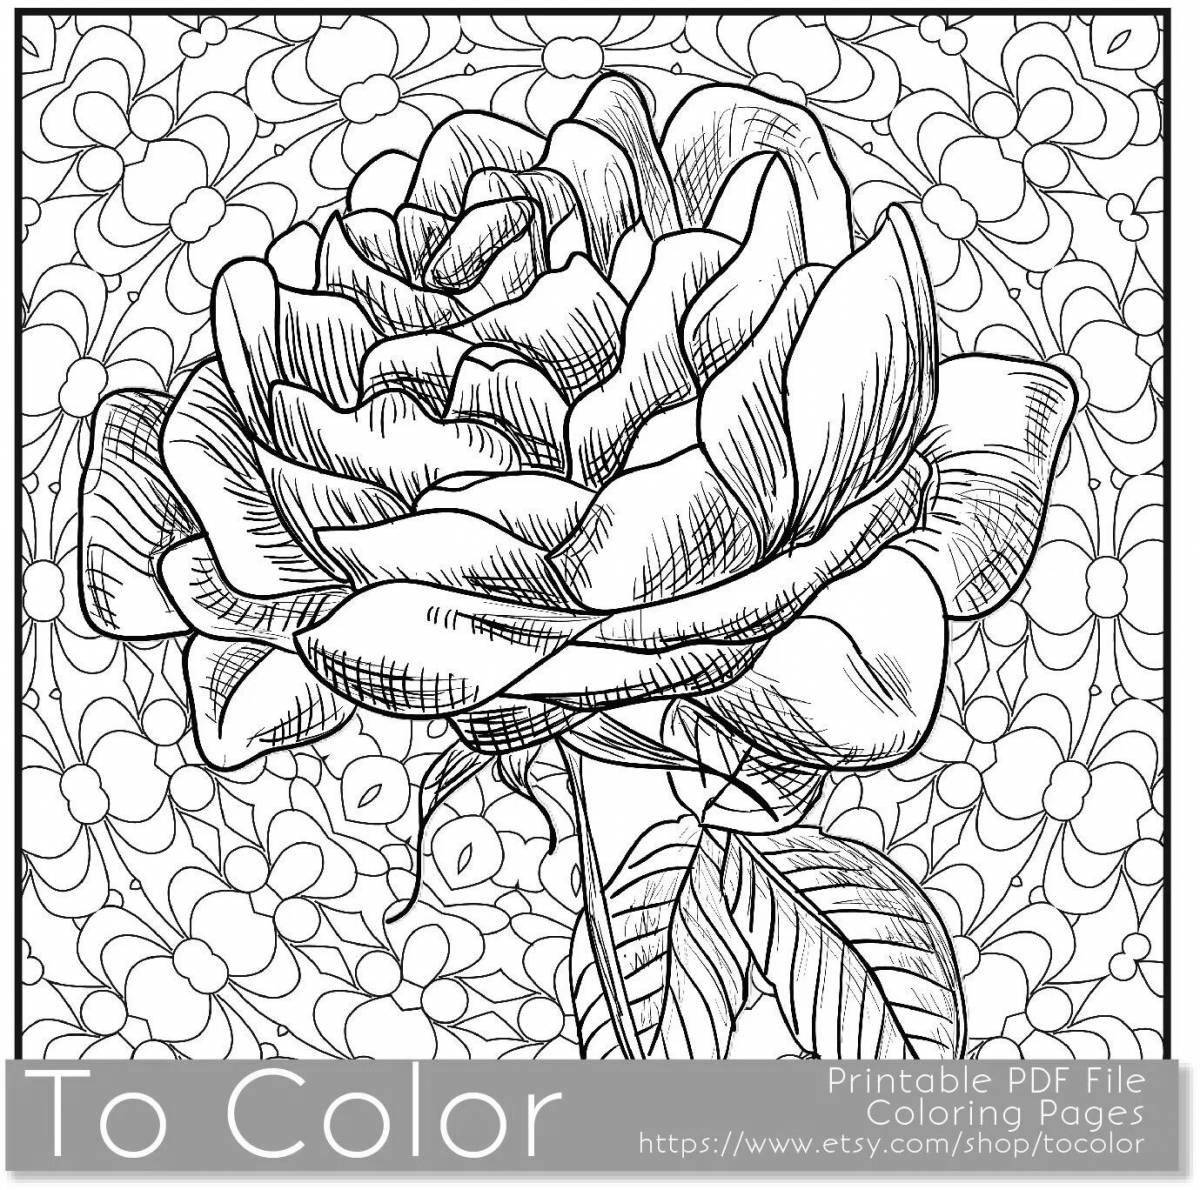 Impeccable coloring beautiful and complex flowers